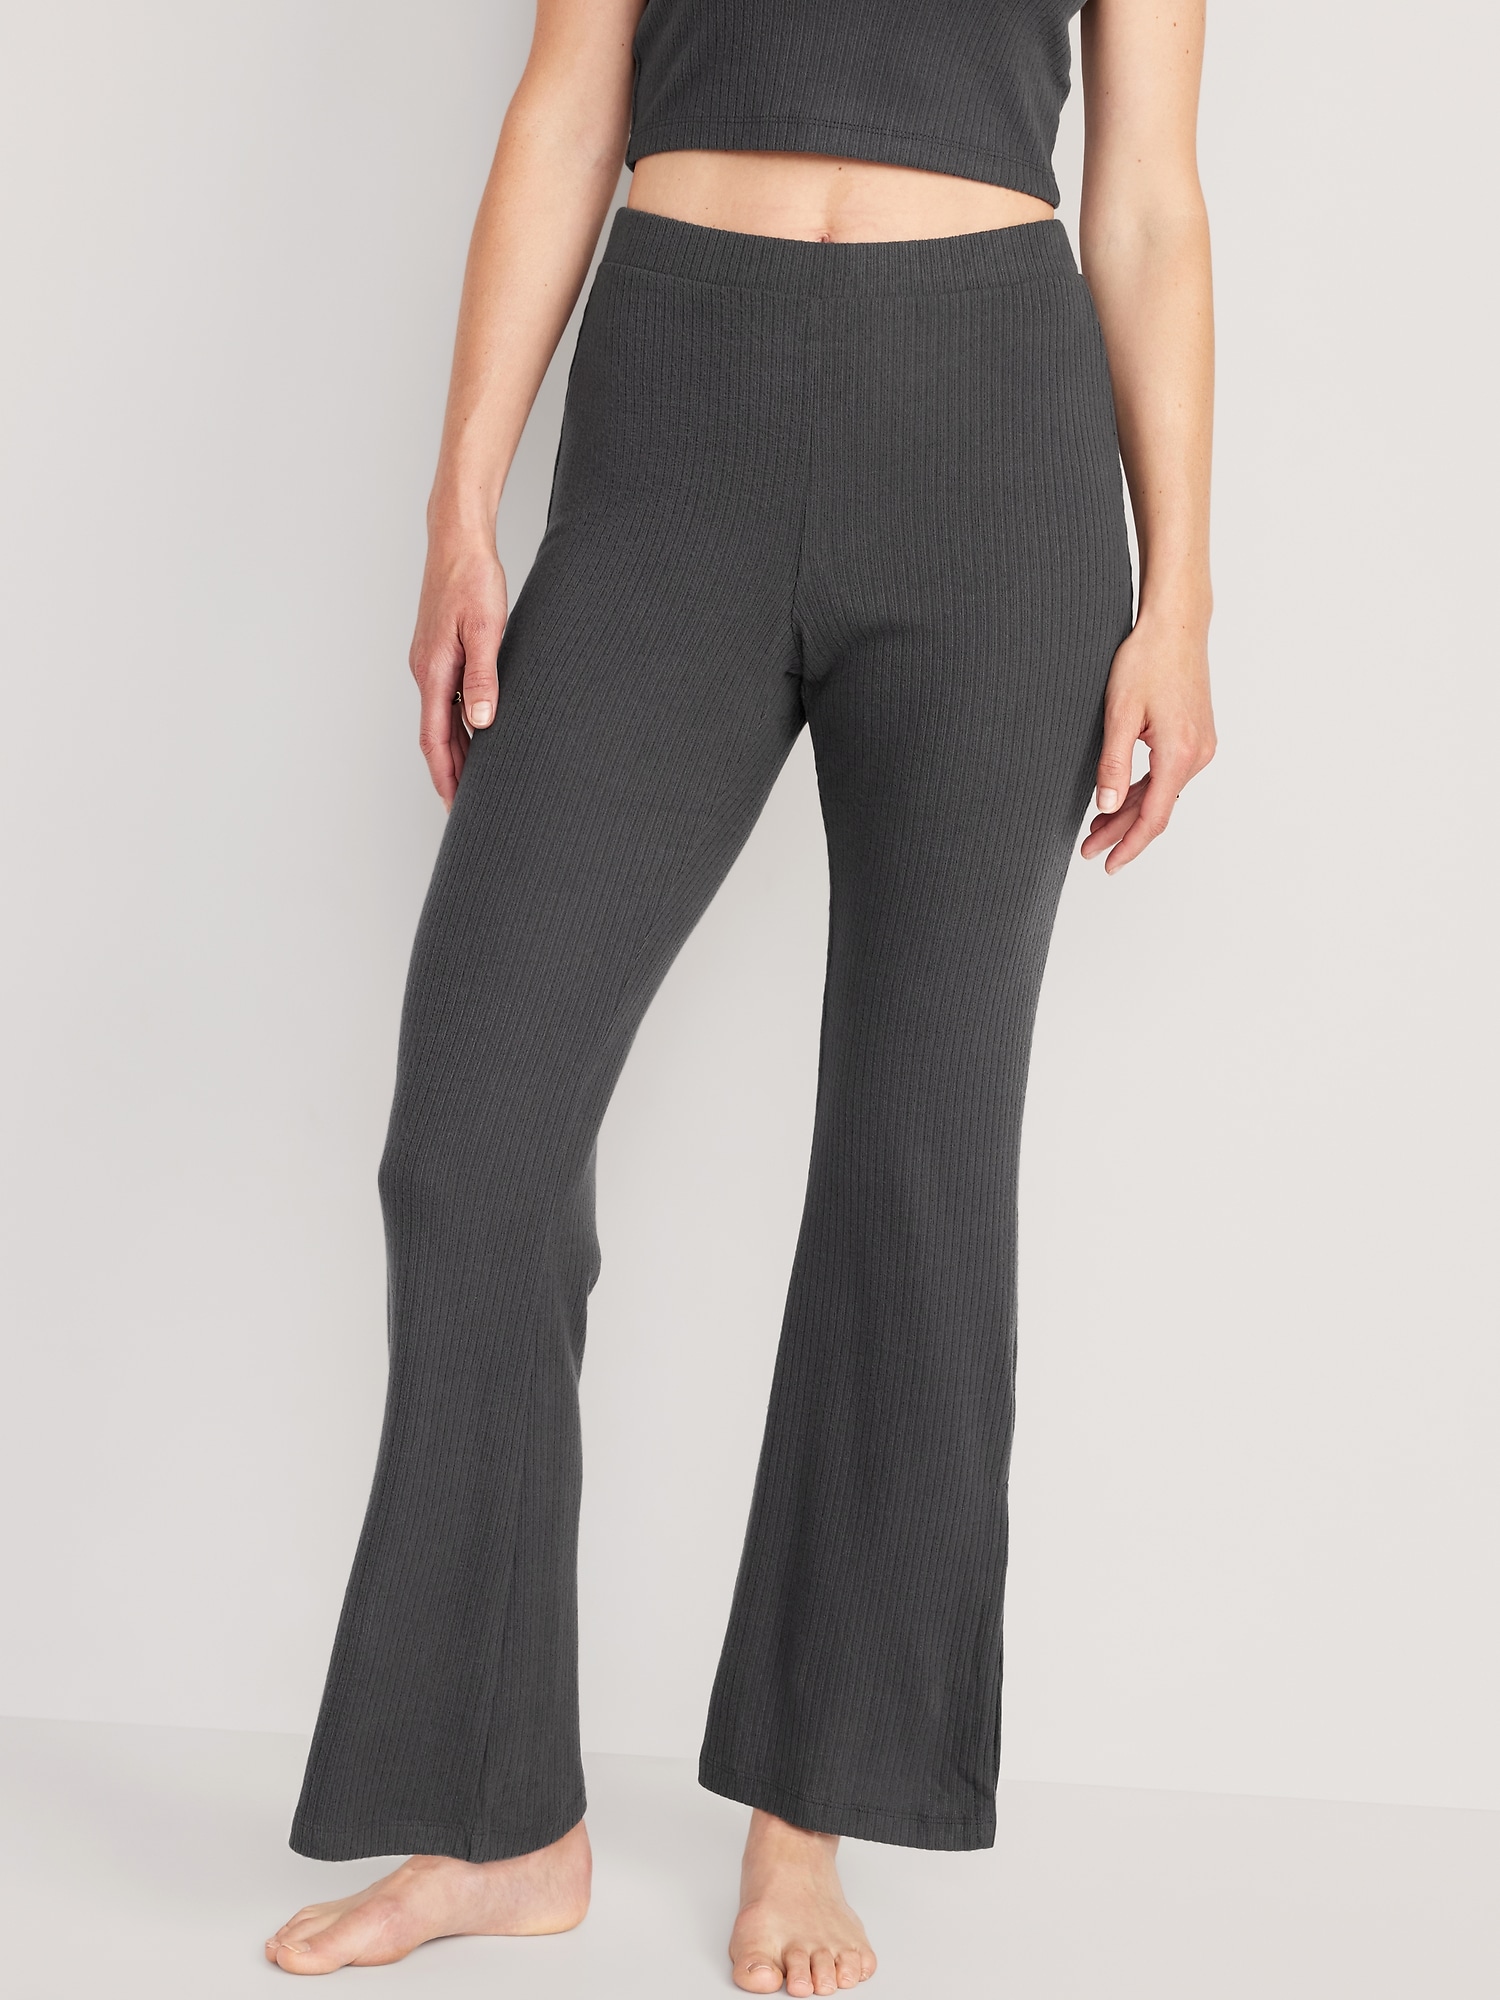 I Saw It First ribbed side split pants in black